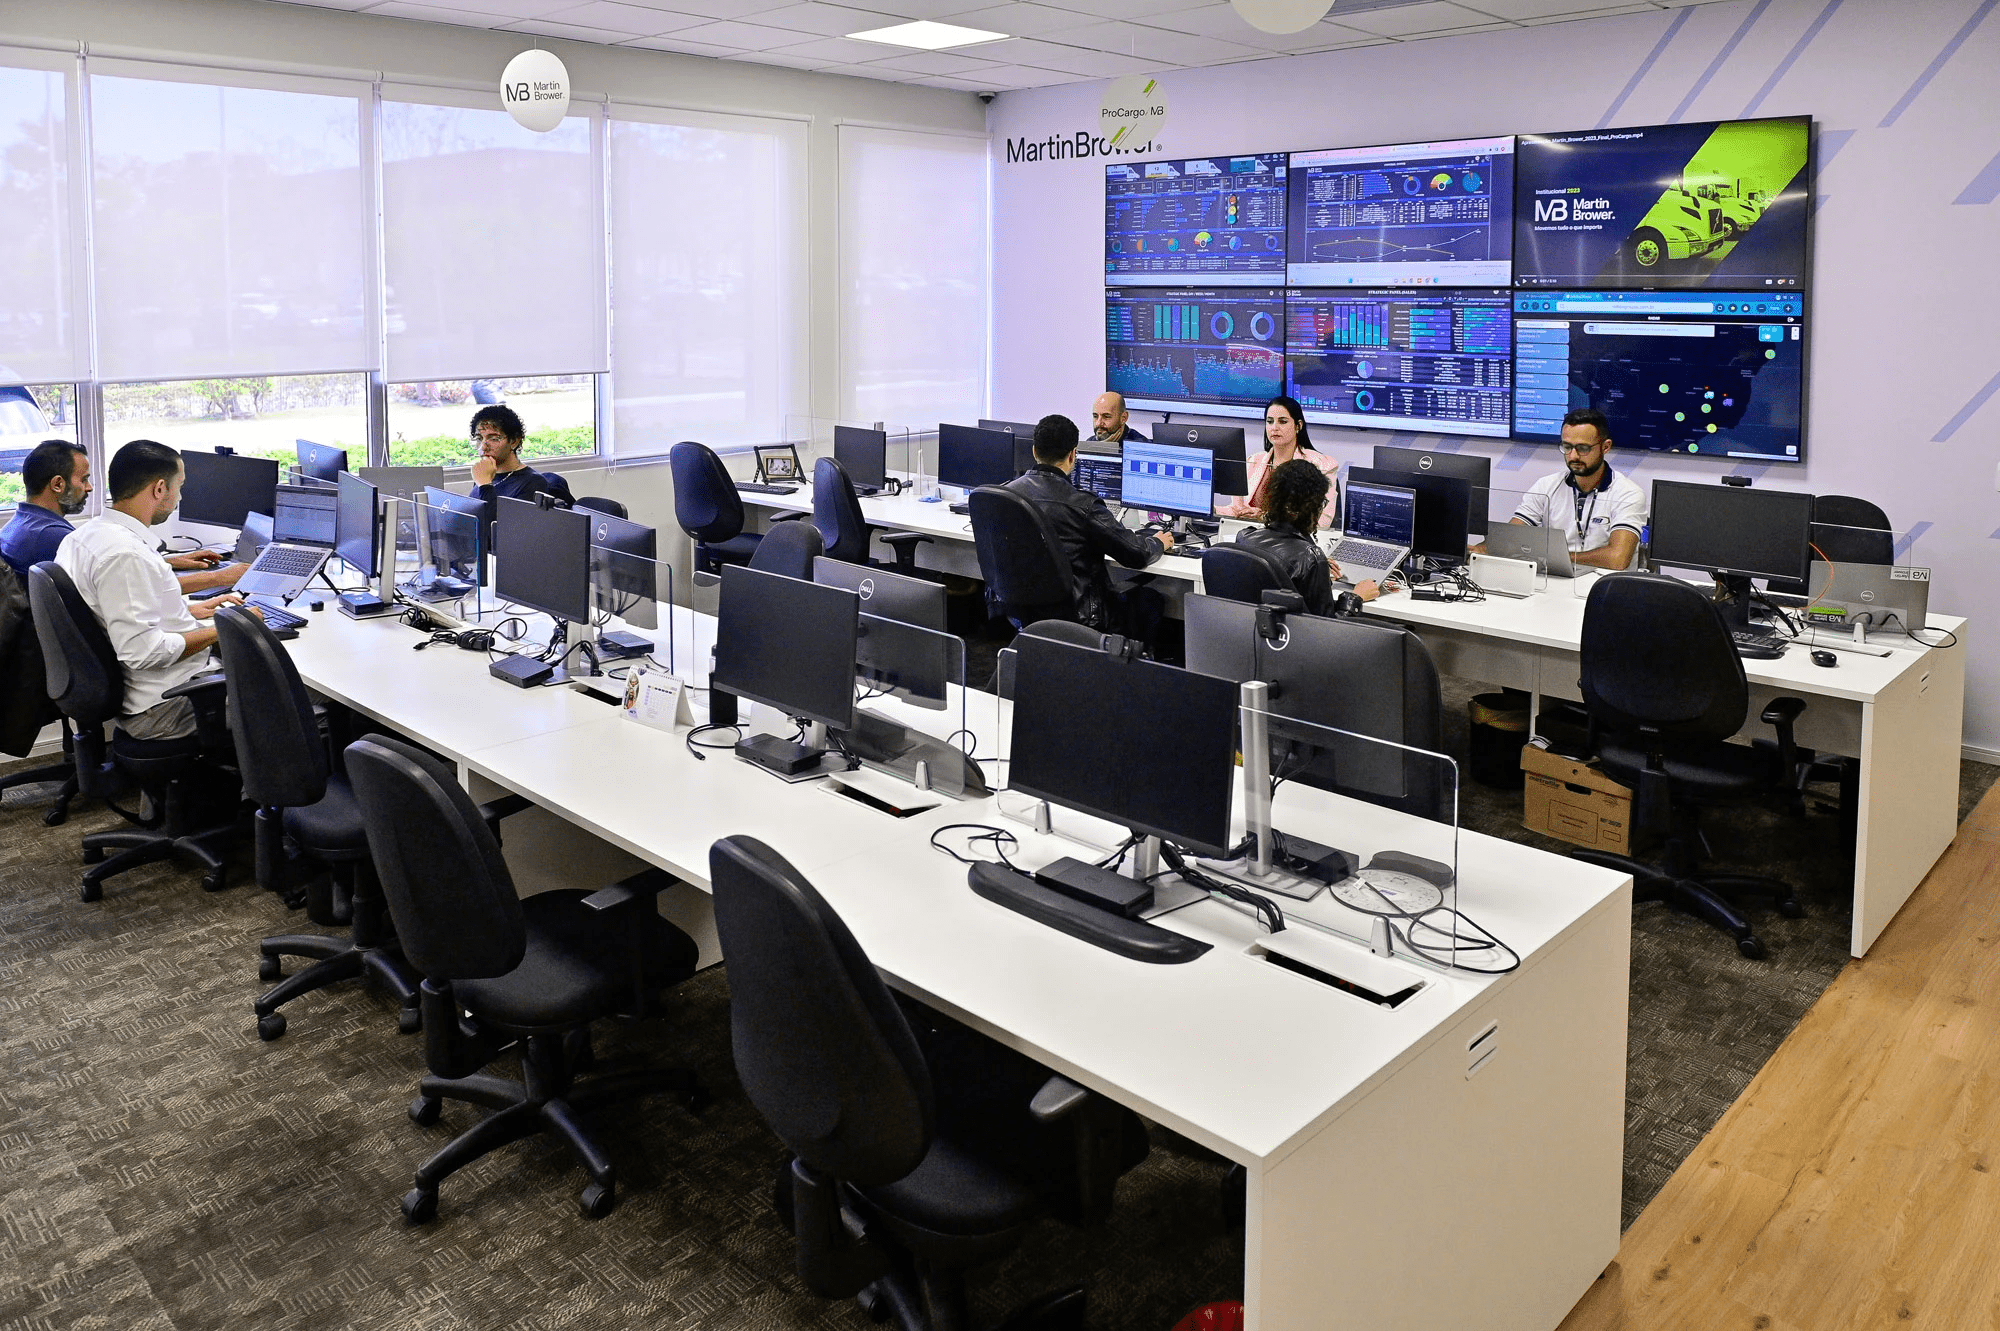 A group of office workers sitting at desktop computers in the monitoring center; on the wall, there are 6 monitors displaying various technical information